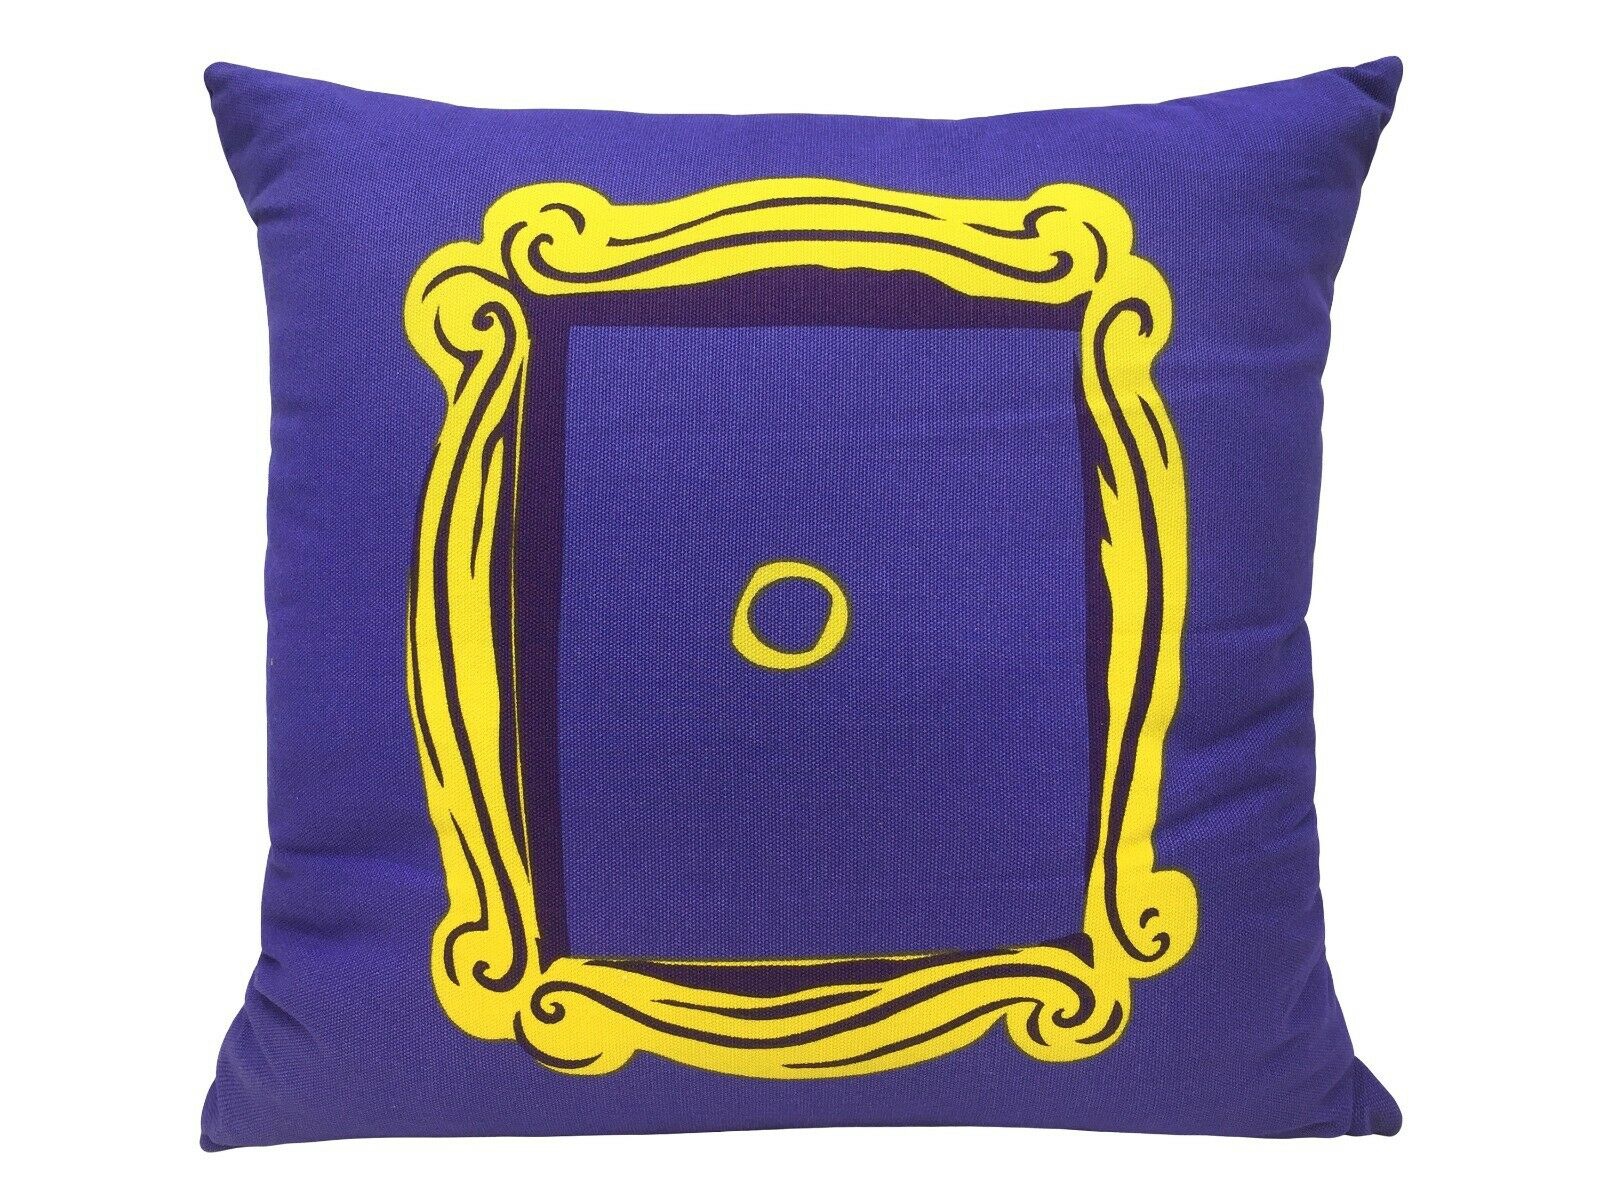 Friends Door Purple Square Shaped Filled Printed Cushion